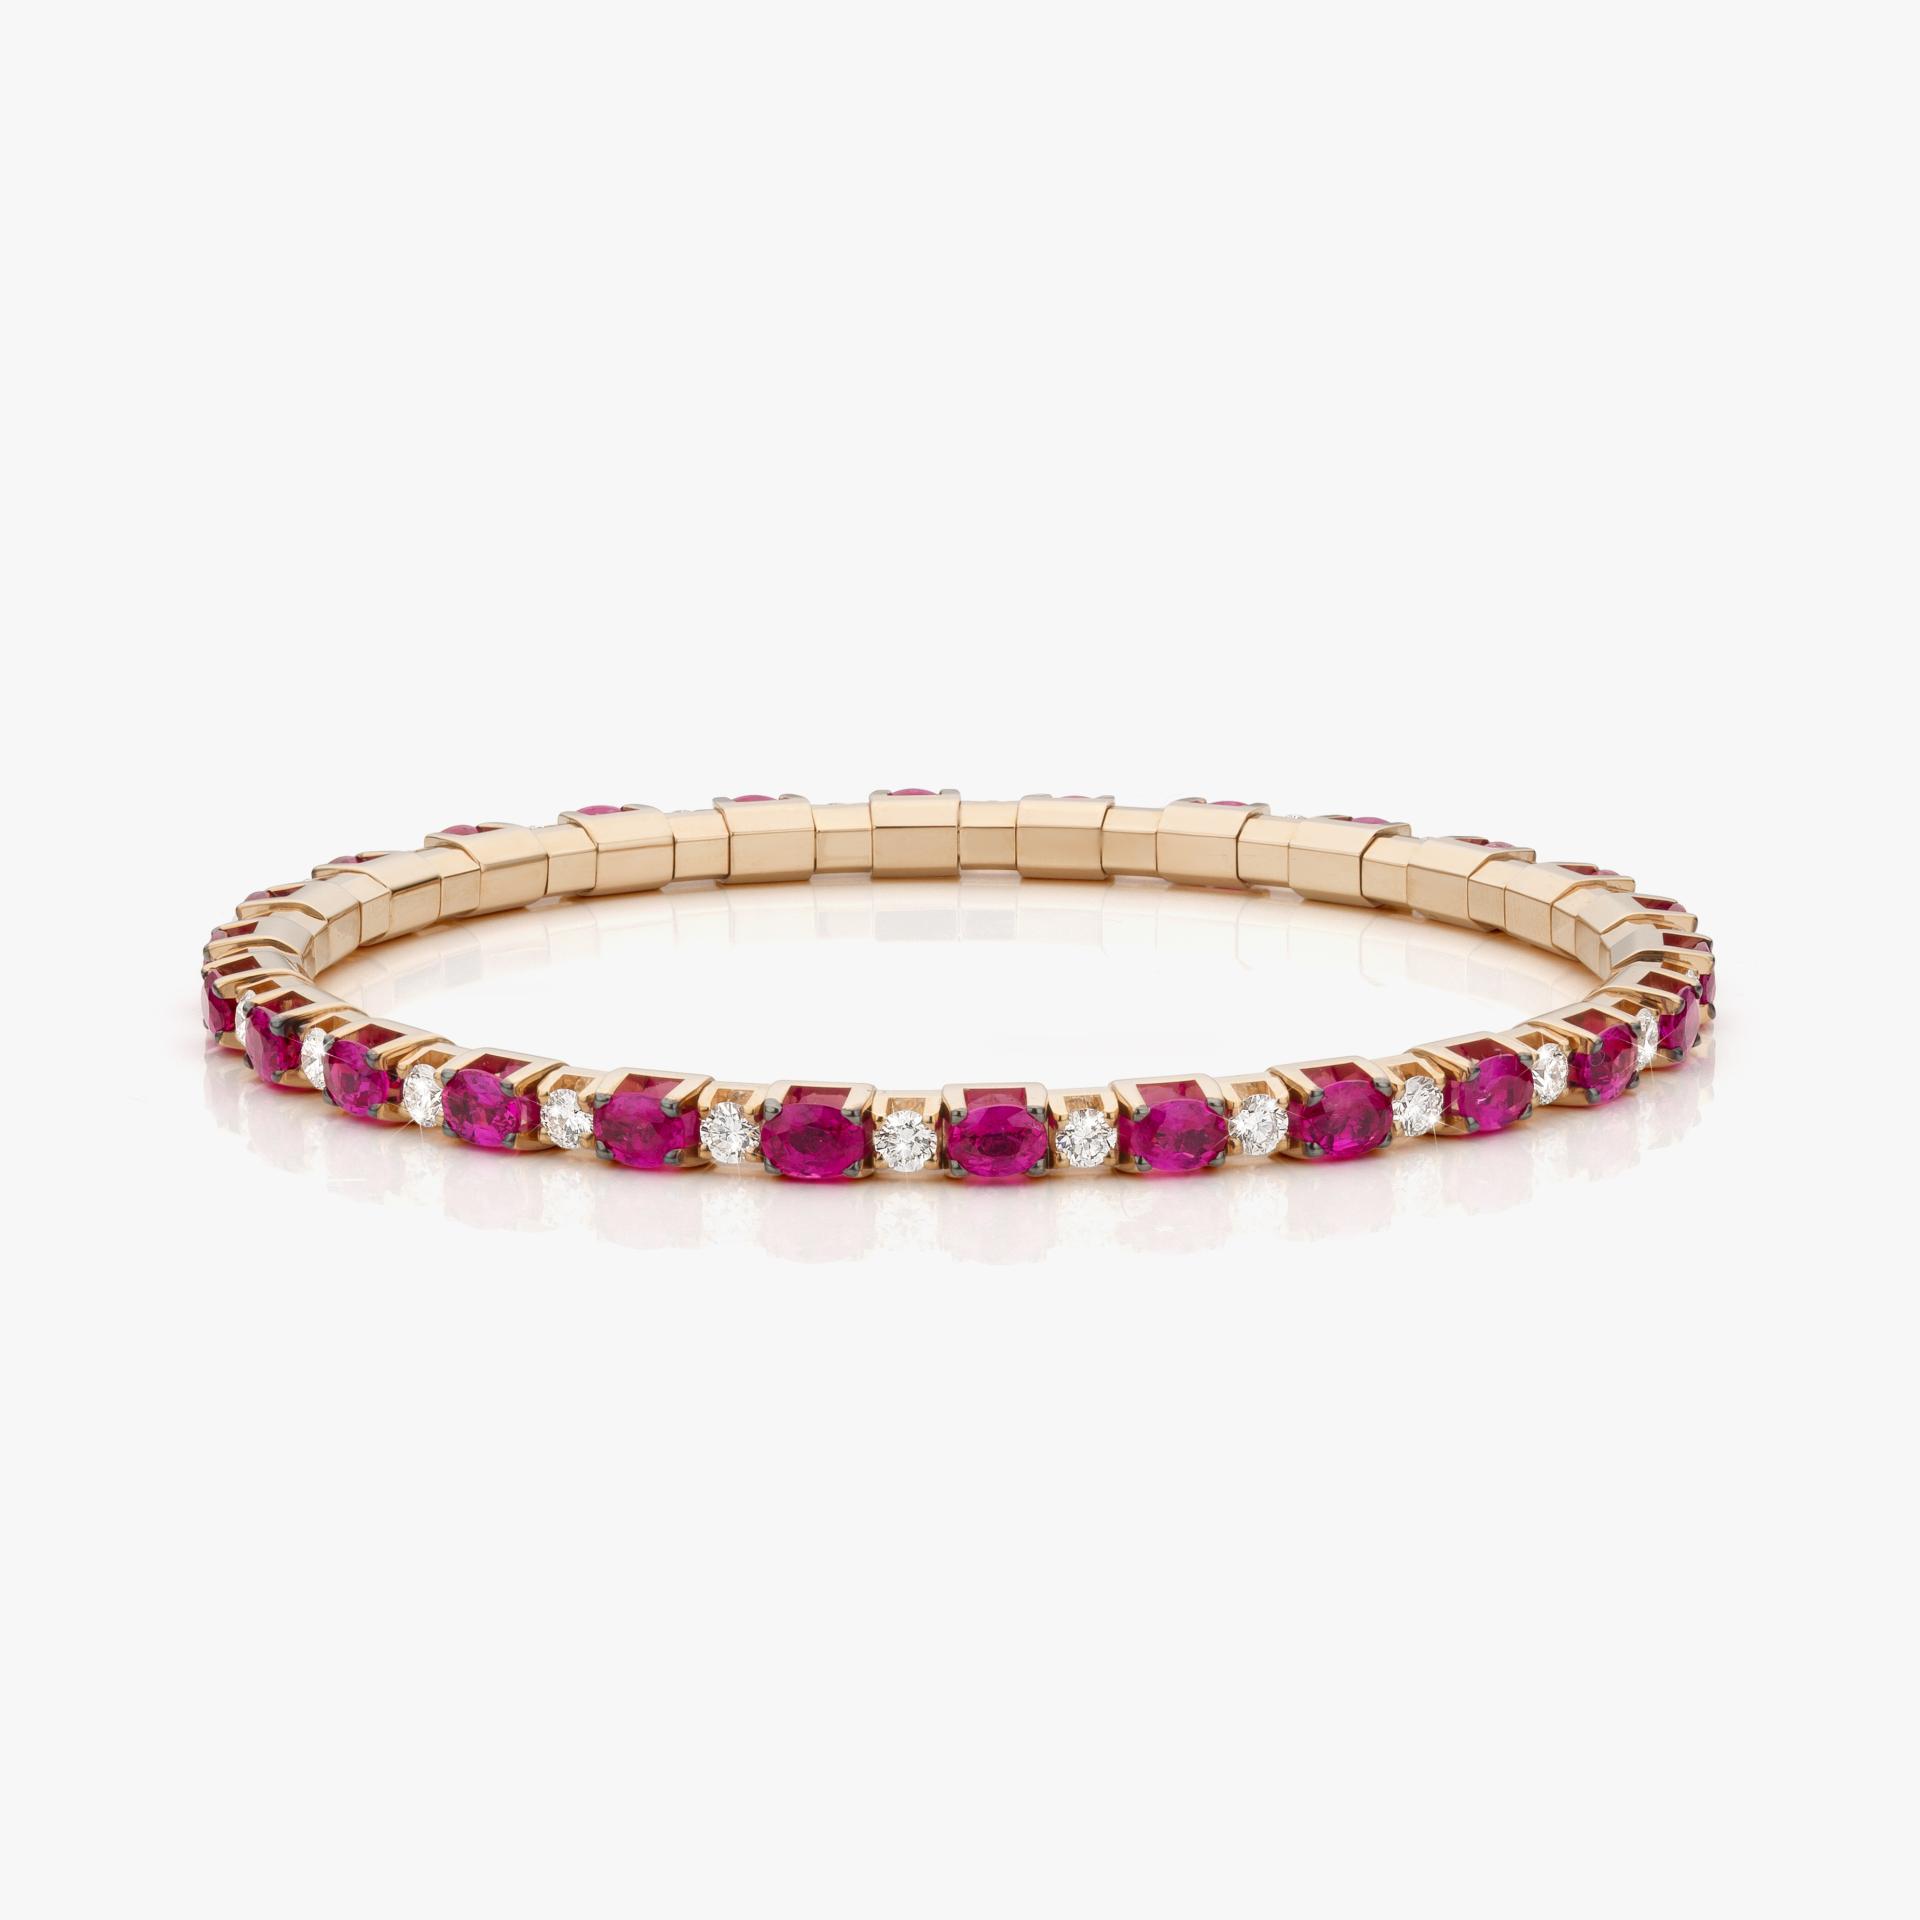 Rose gold bracelet Extensible set with diamonds and rubies made by Demeglio